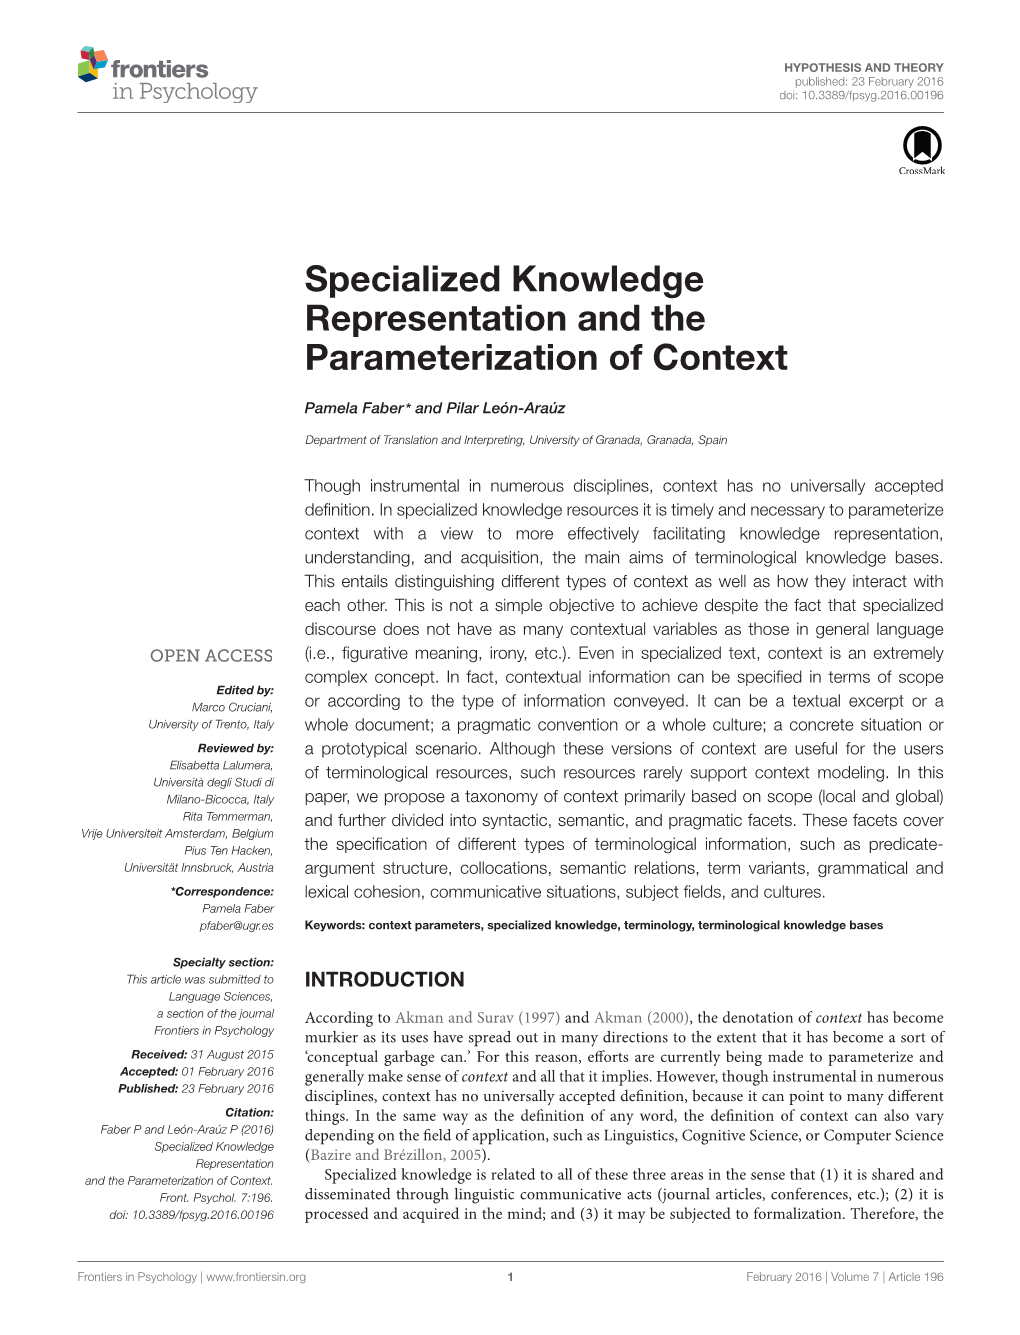 Specialized Knowledge Representation and the Parameterization of Context